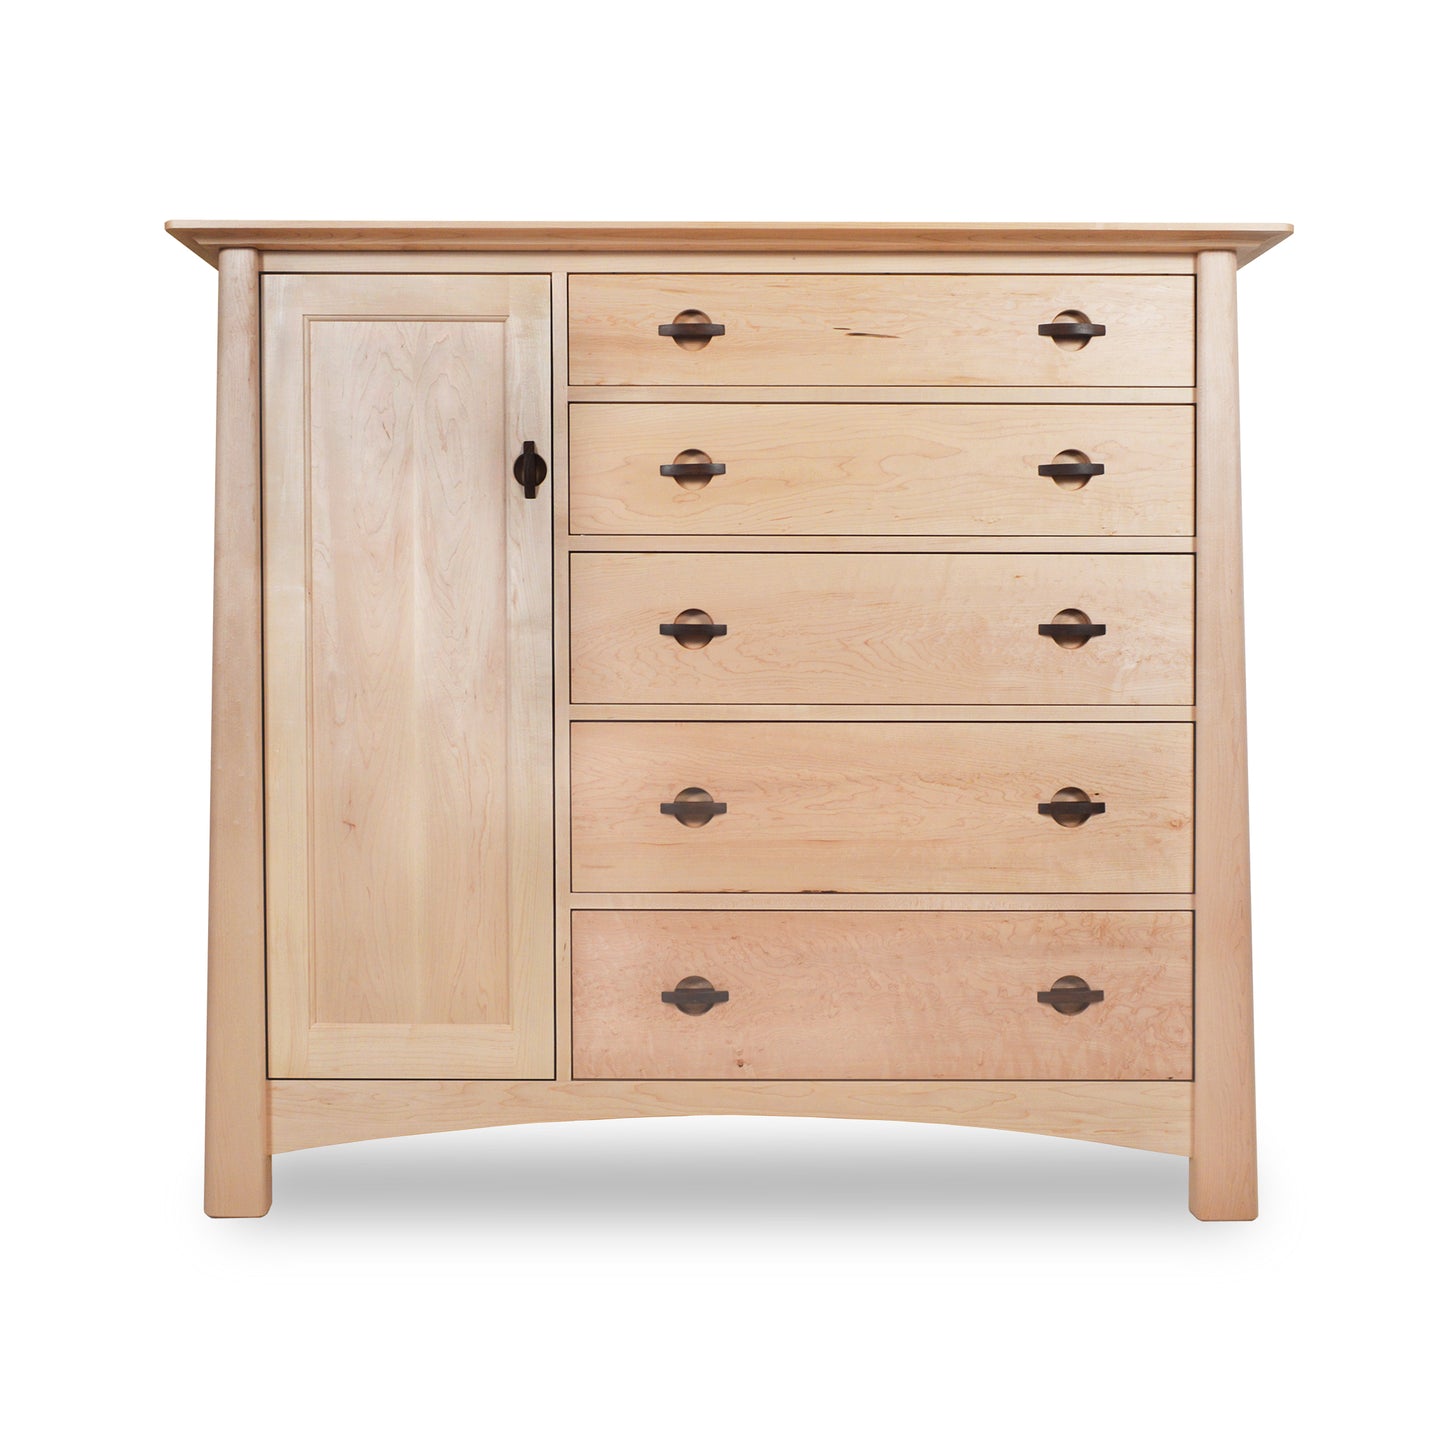 Maple Corner Woodworks Cherry Moon Gent's Chest, crafted from solid woods, with a single door and five drawers, isolated on a white background.